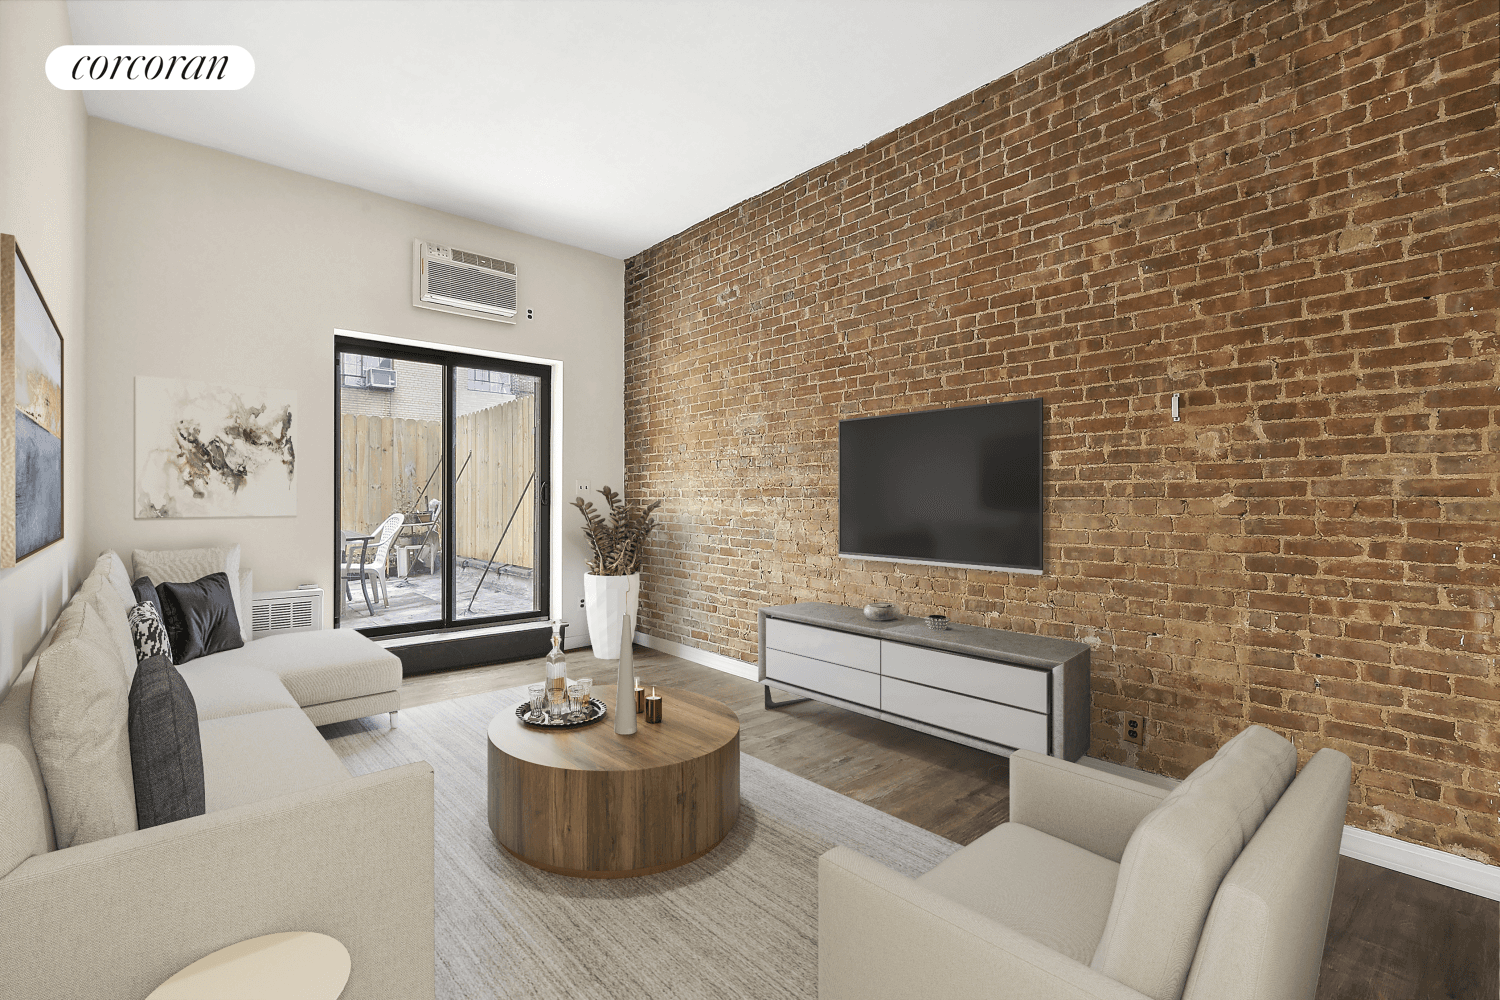 Welcome to gut renovated apartment 3B at 10 West 87th Street, where luxury and convenience meet in the heart of the Upper West Side.